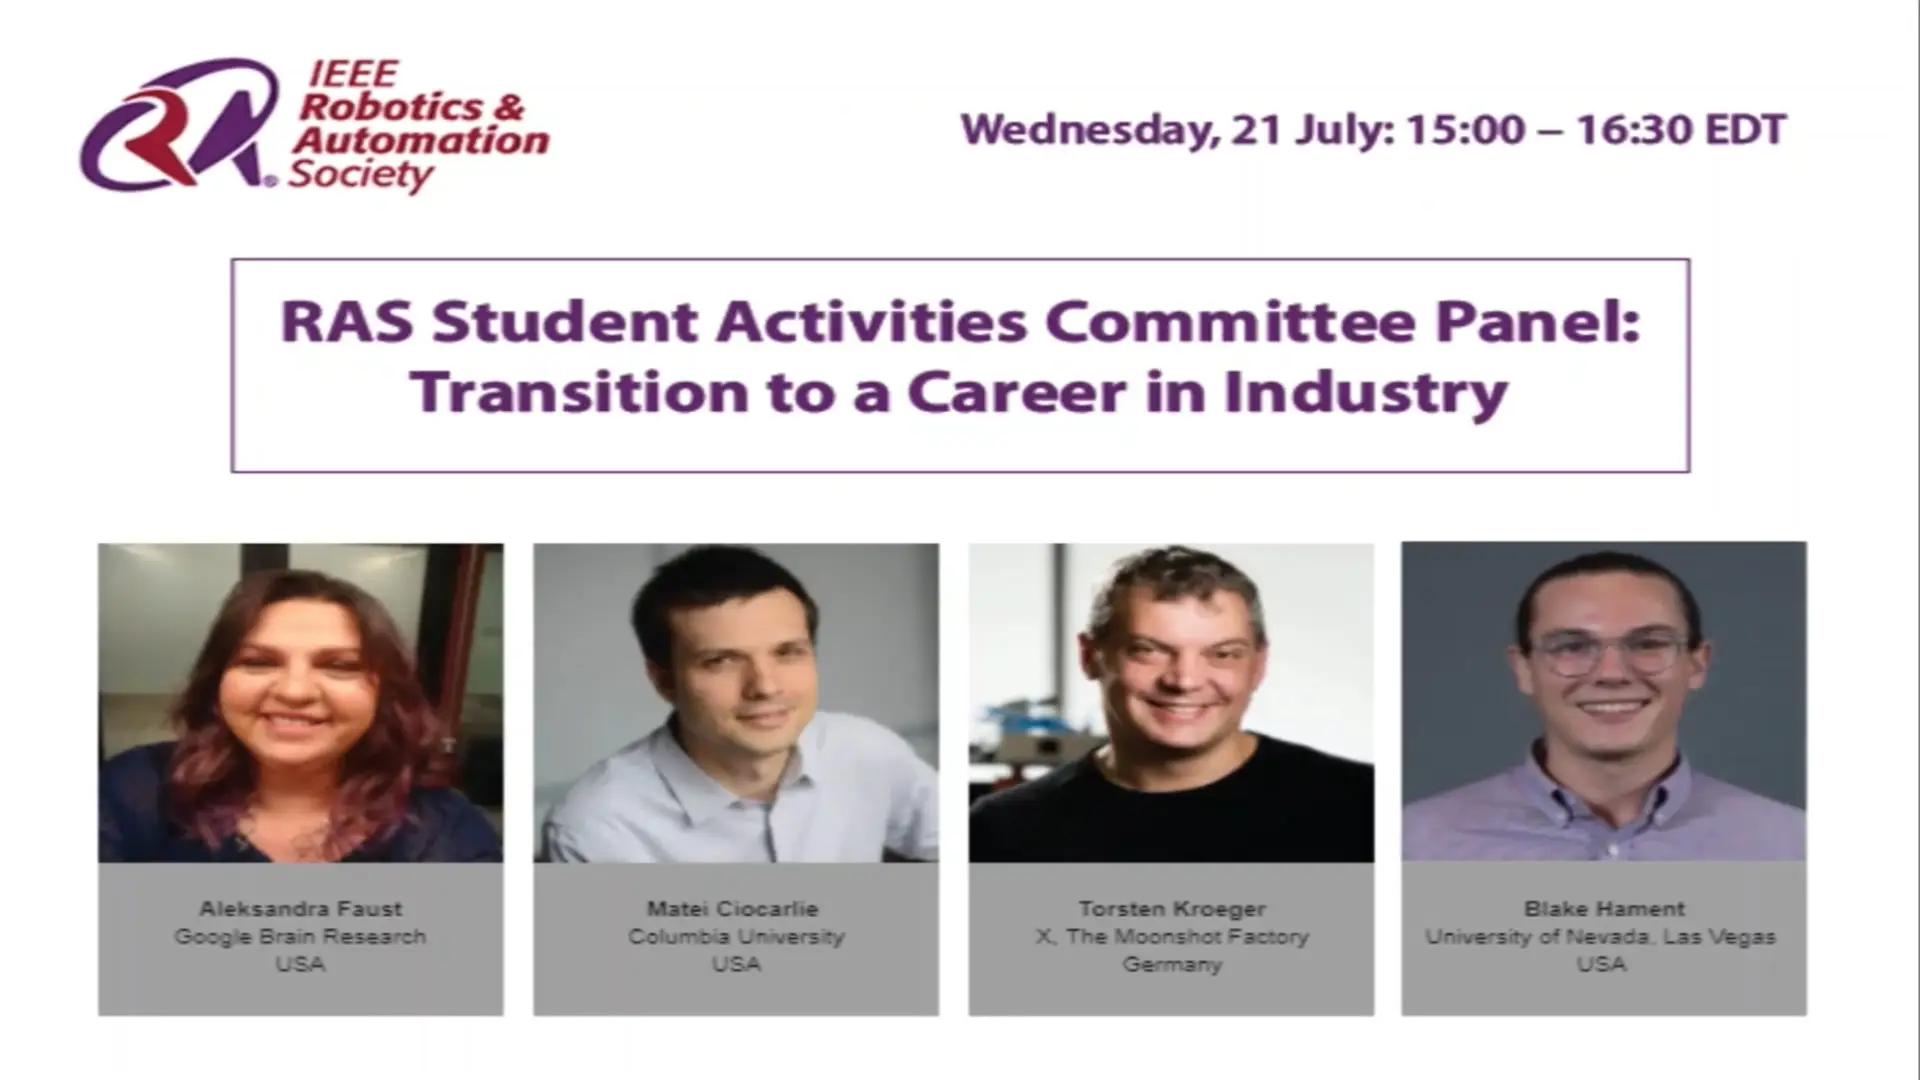 Transition to a Career in Industry